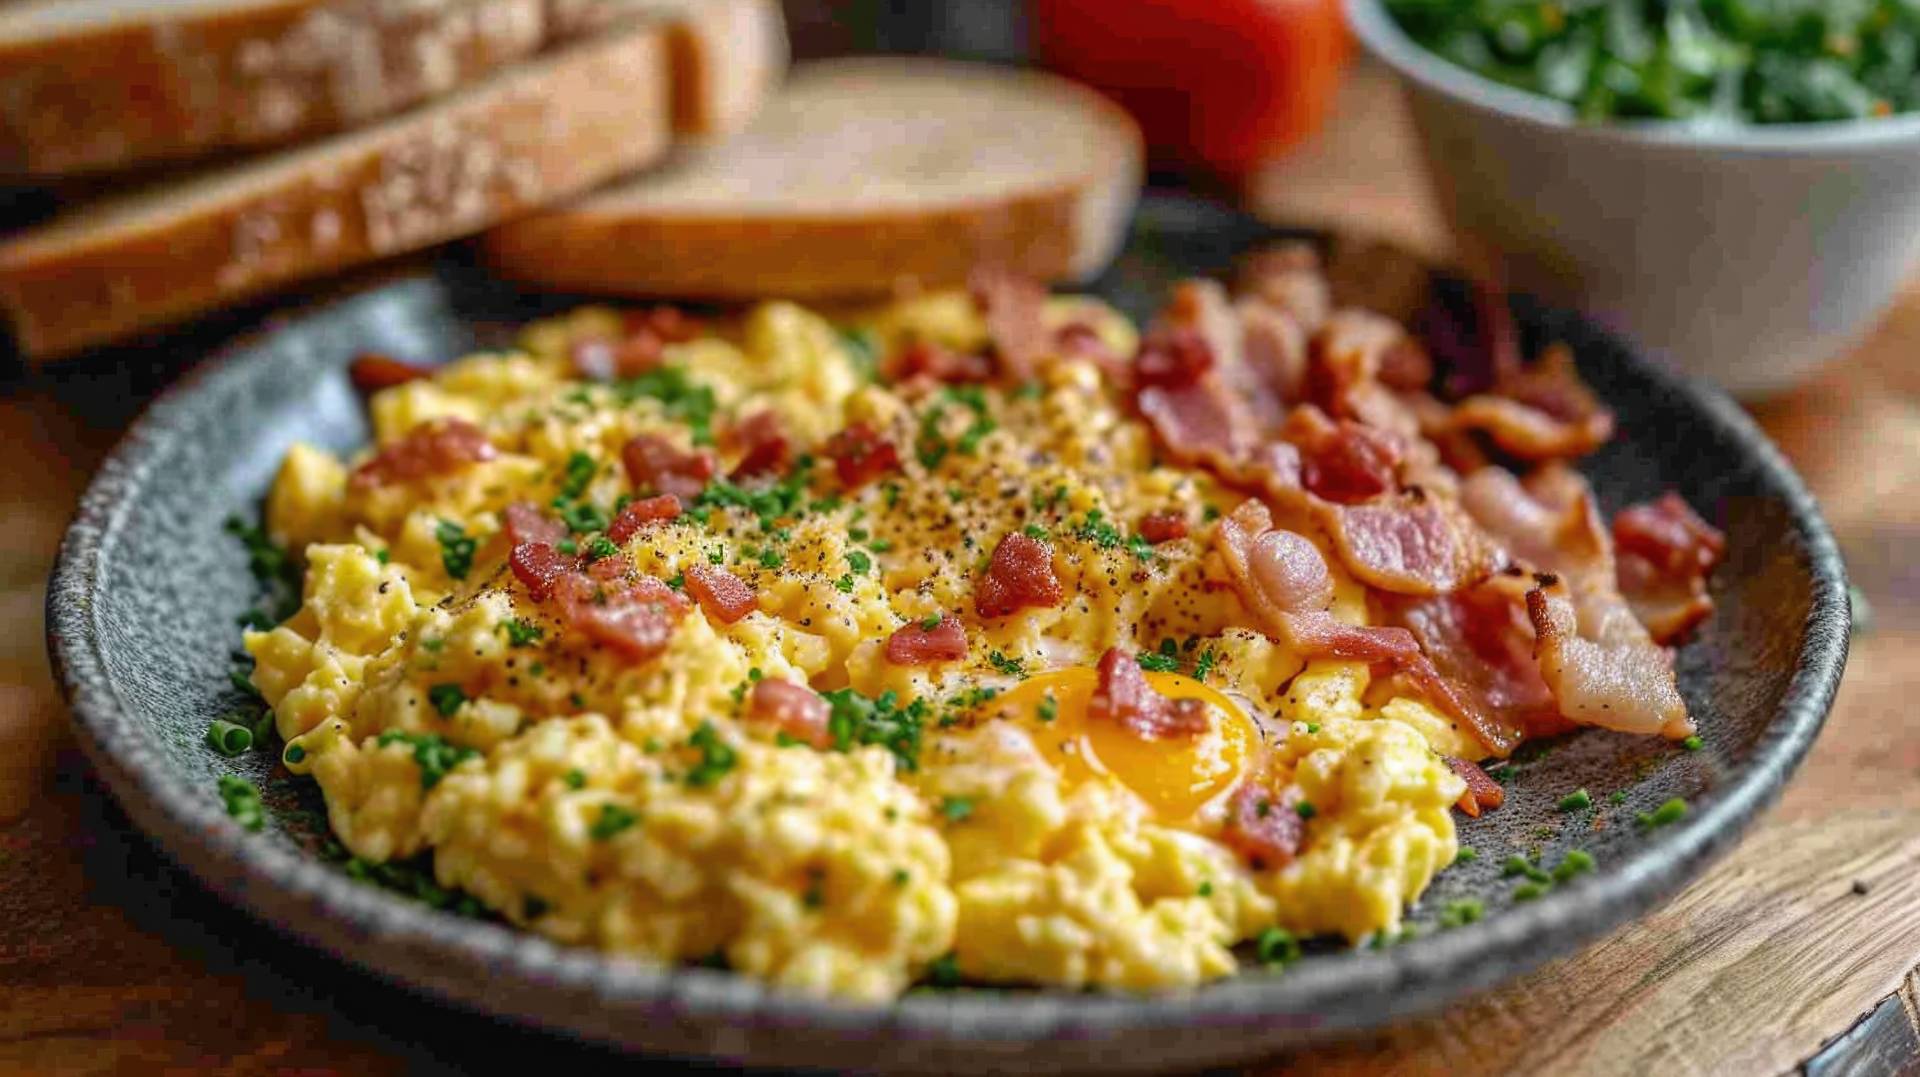 Bacon and Eggs Breakfast Bowl